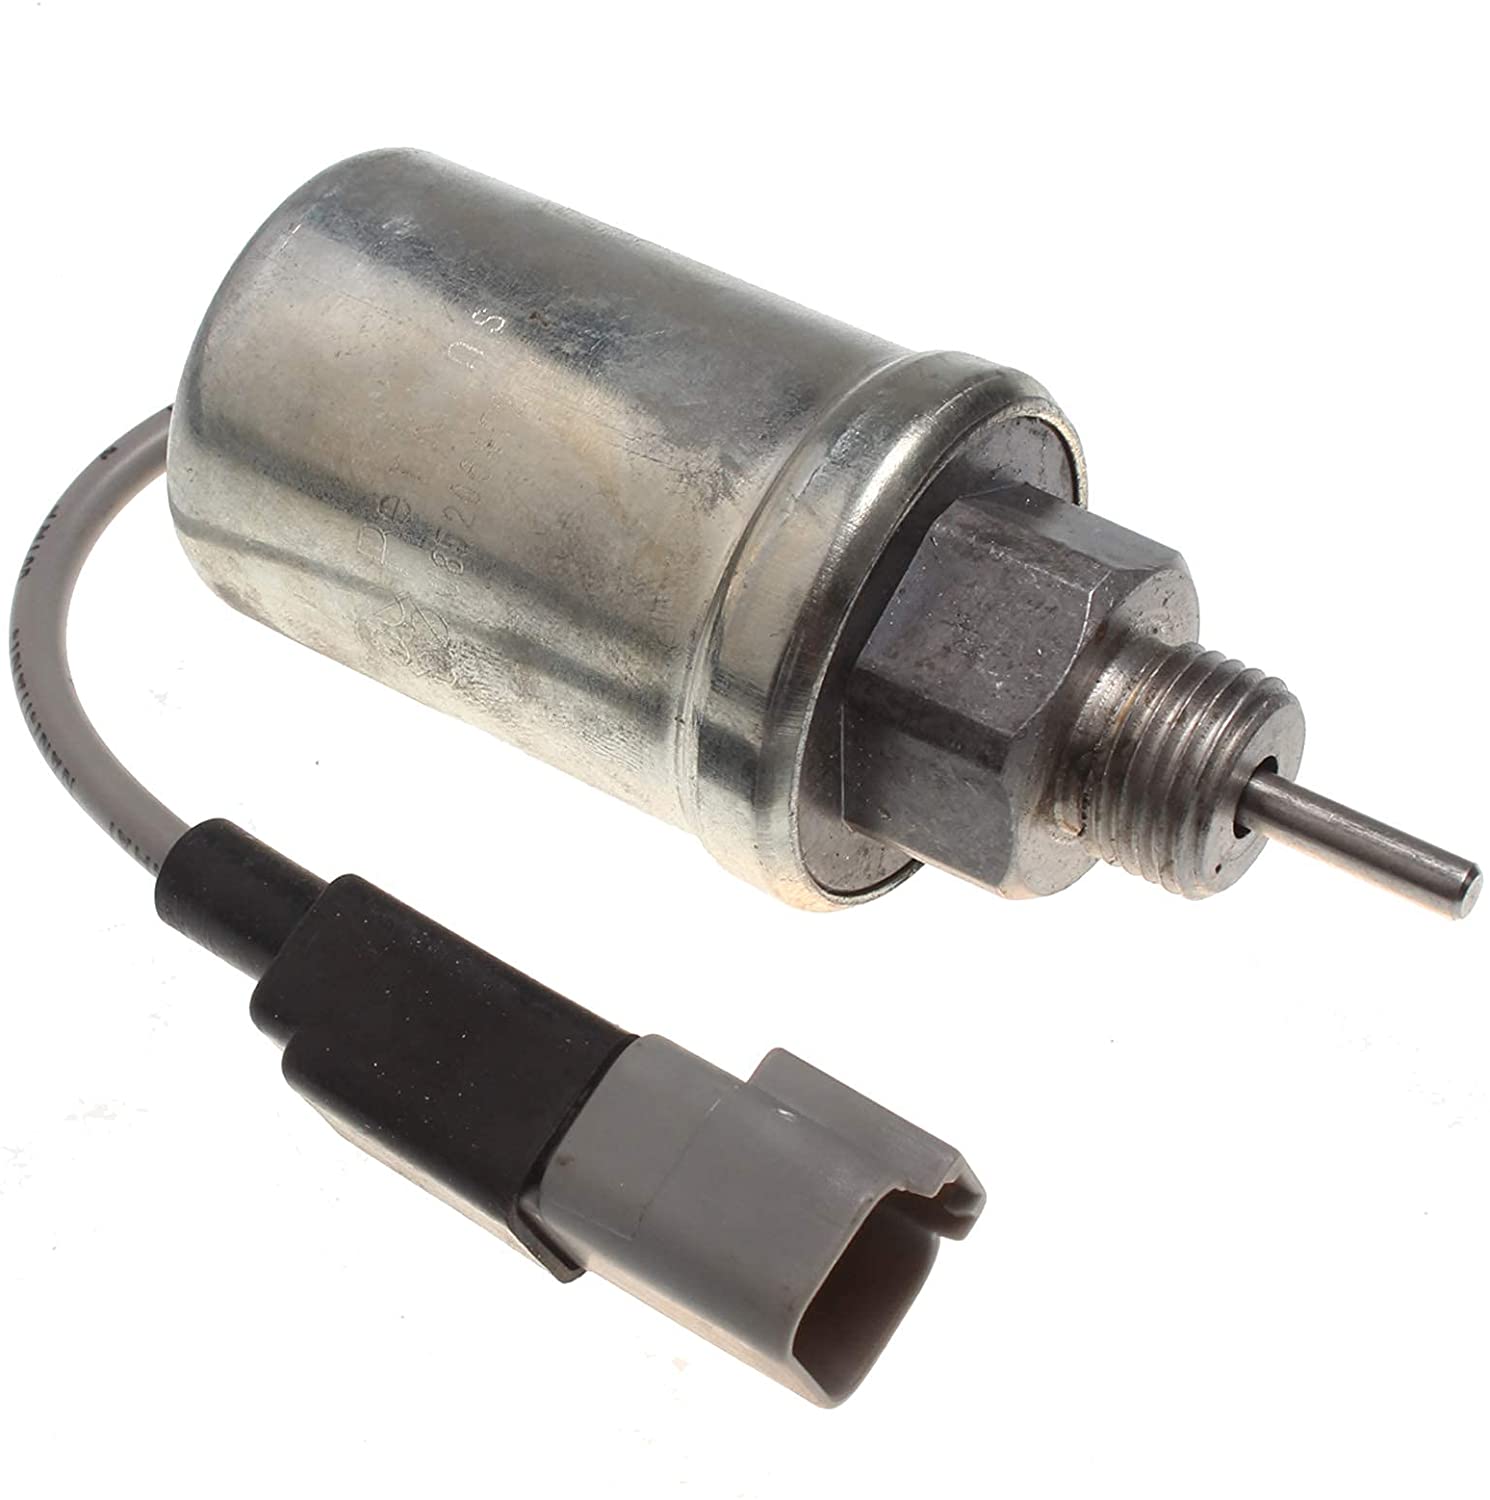 12V Fuel Stop Throttle Solenoid T401132 BW2364 for Perkins Engine 403A-15 403D-11 403D-15 403D-15T 404A-22 404D-22 404D-22T 404F-22 402D-05 403C-15 403D-07 404C-22T 4-Cylinder Engines - KUDUPARTS